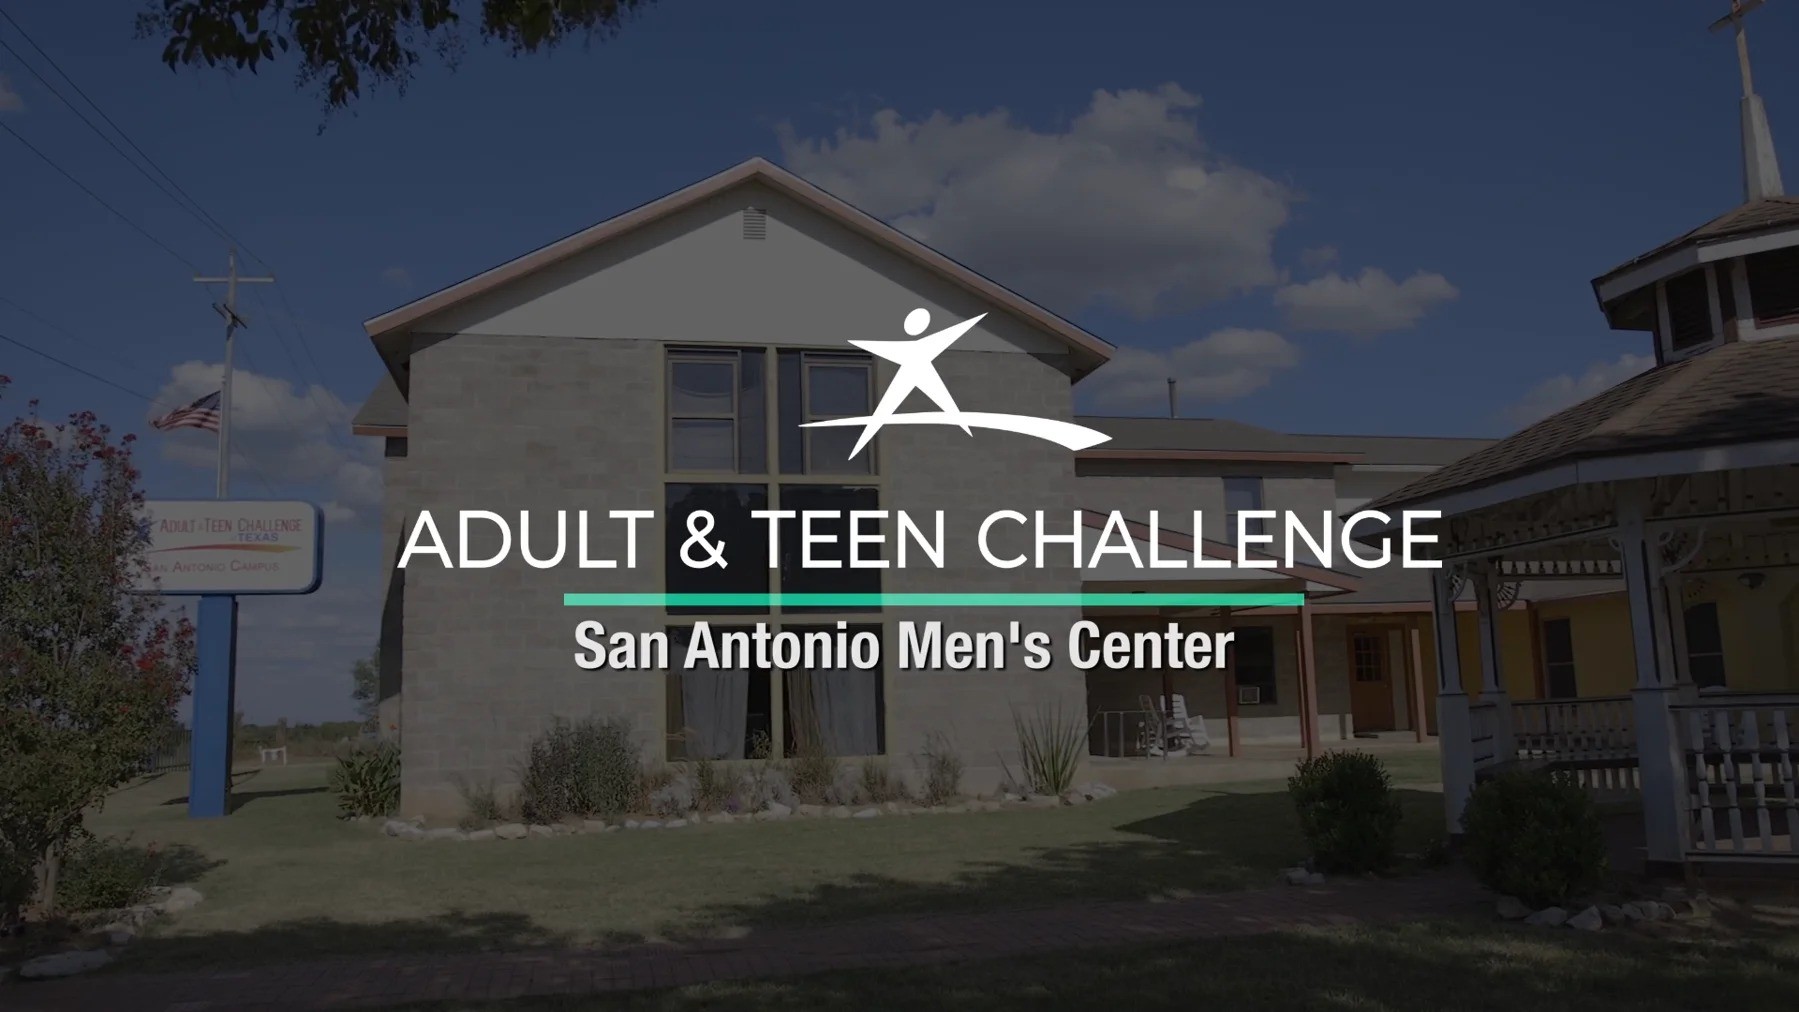 The Men's Rehab Center serves men suffering from drug & alcohol addiction with 12-month residential discipleship & life skills training